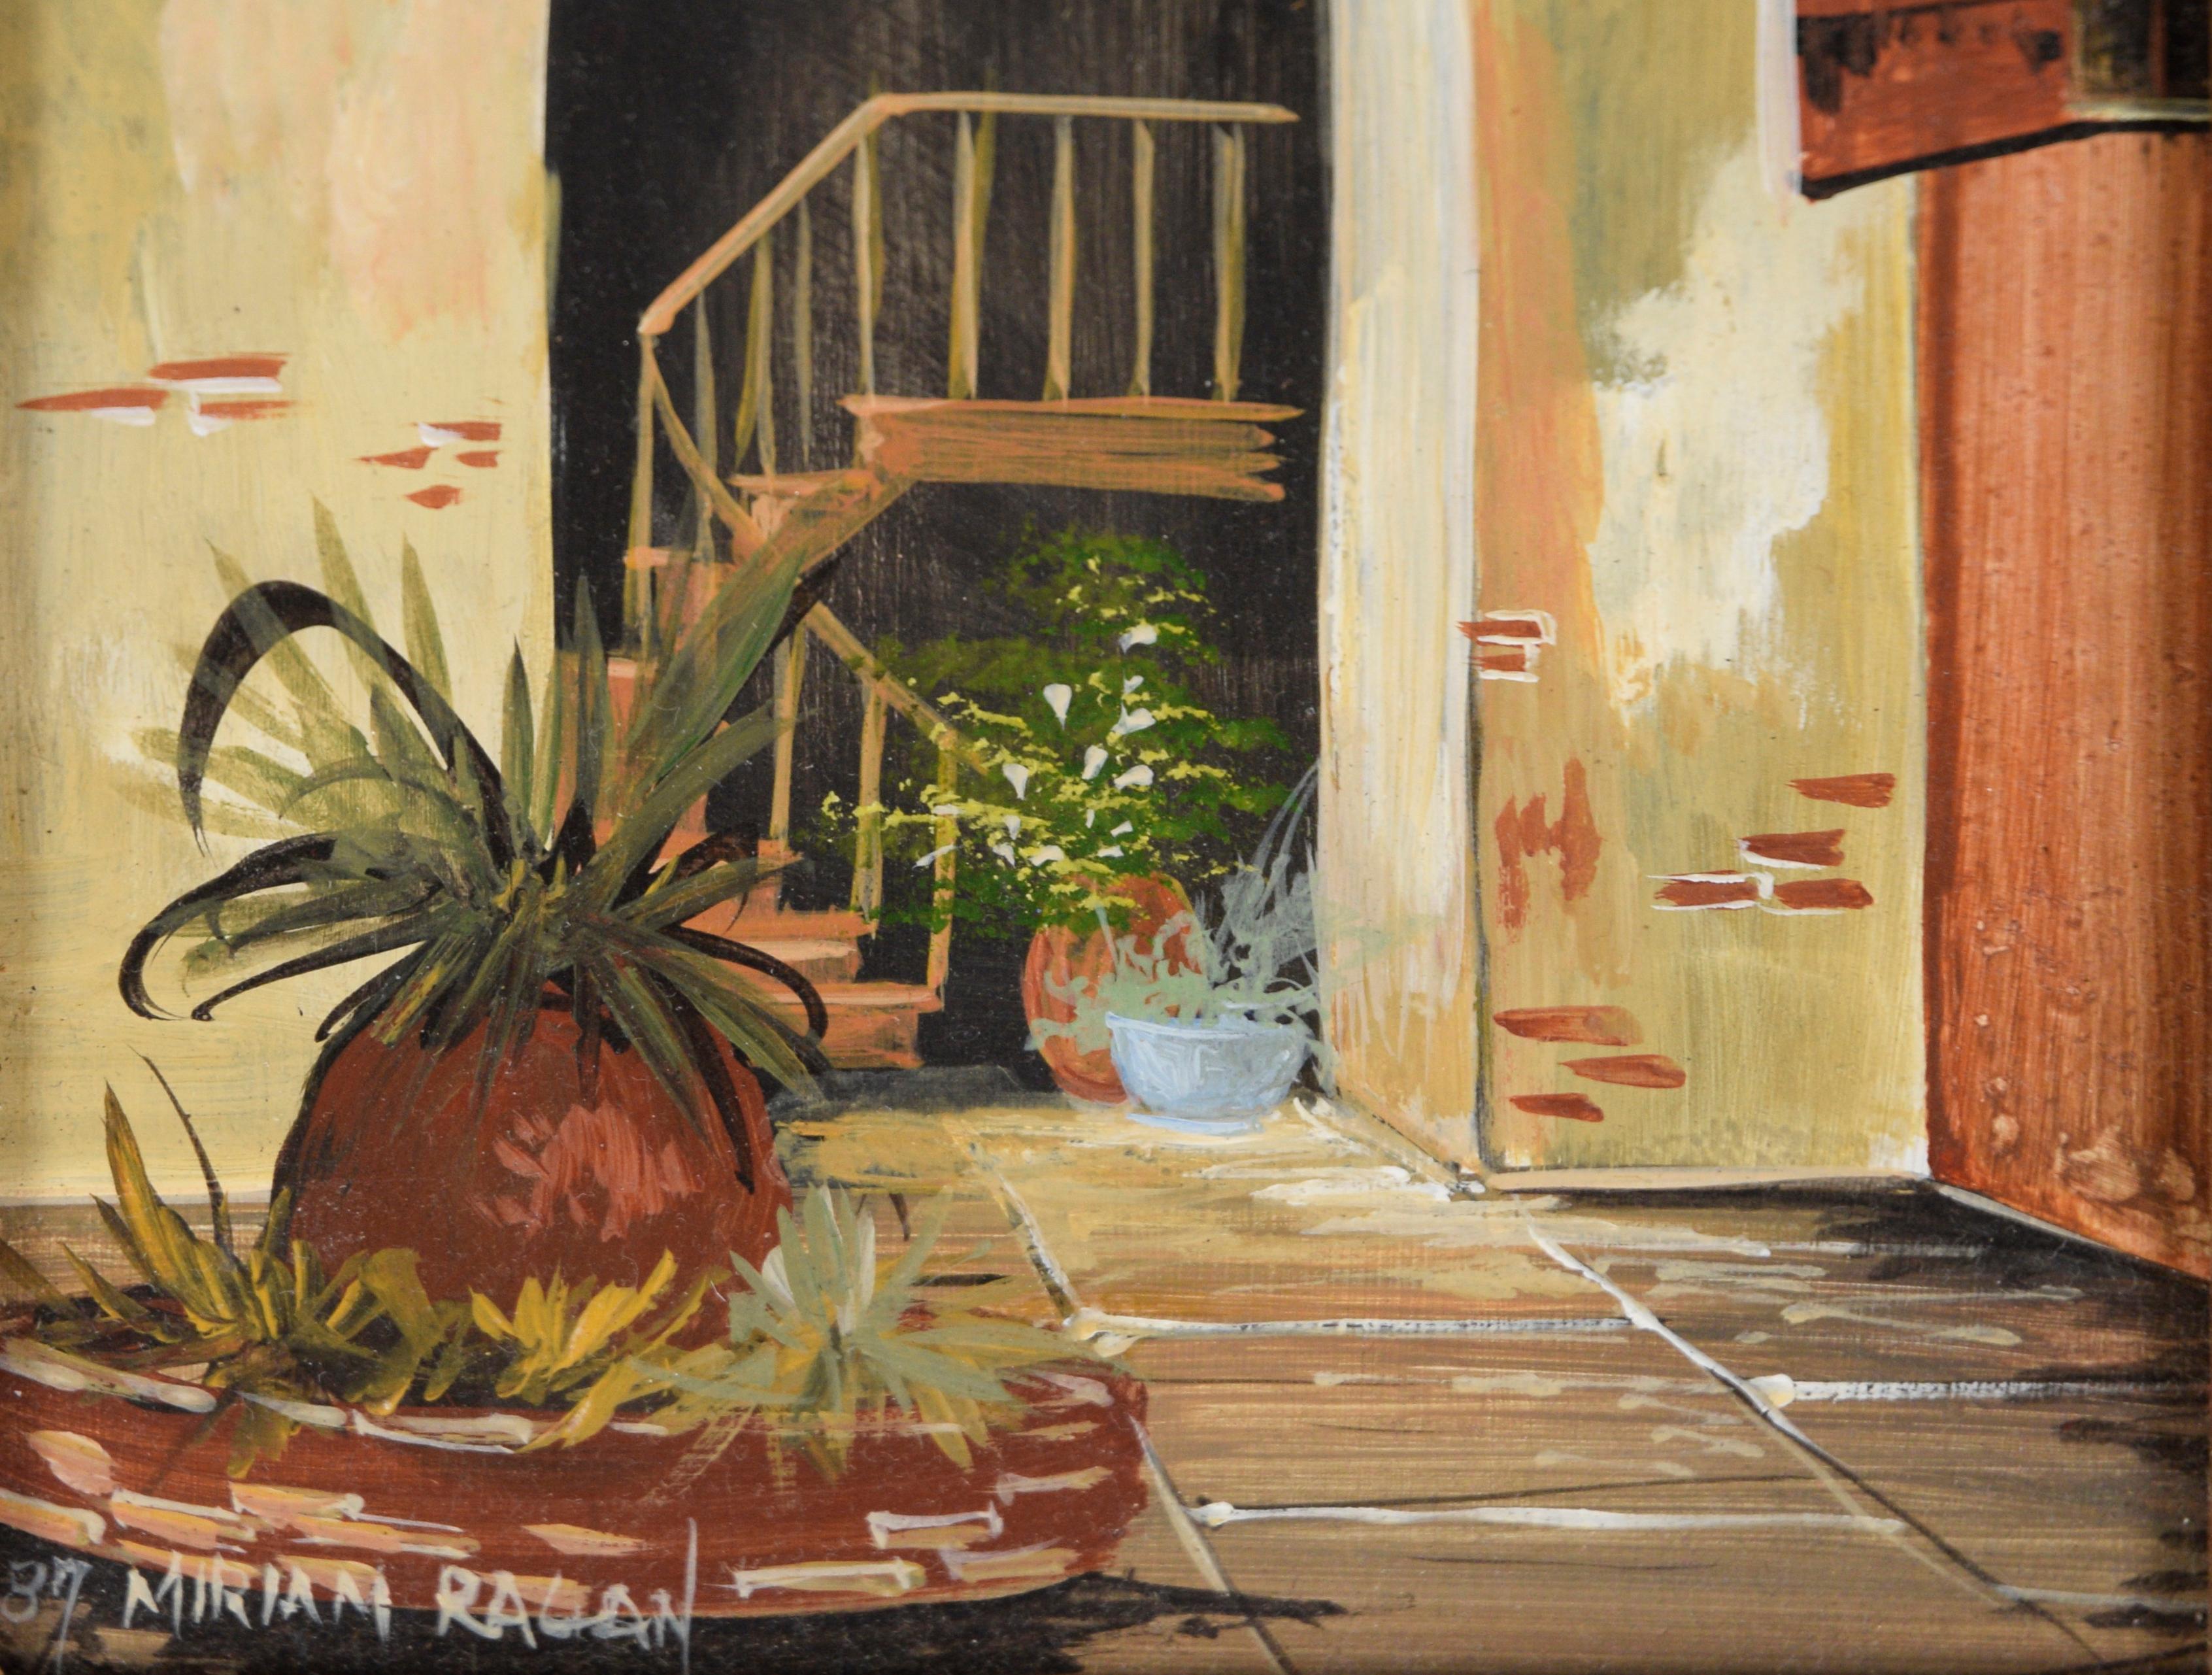 The Staircase - 1987 Original Oil on Masonite

Original 1987 oil painting depicting a staircase behind a brick archway by Miriam Ragan (American, 1930-2014). The viewer looks onward toward the staircase, plants can be seen on the ceiling and in pots